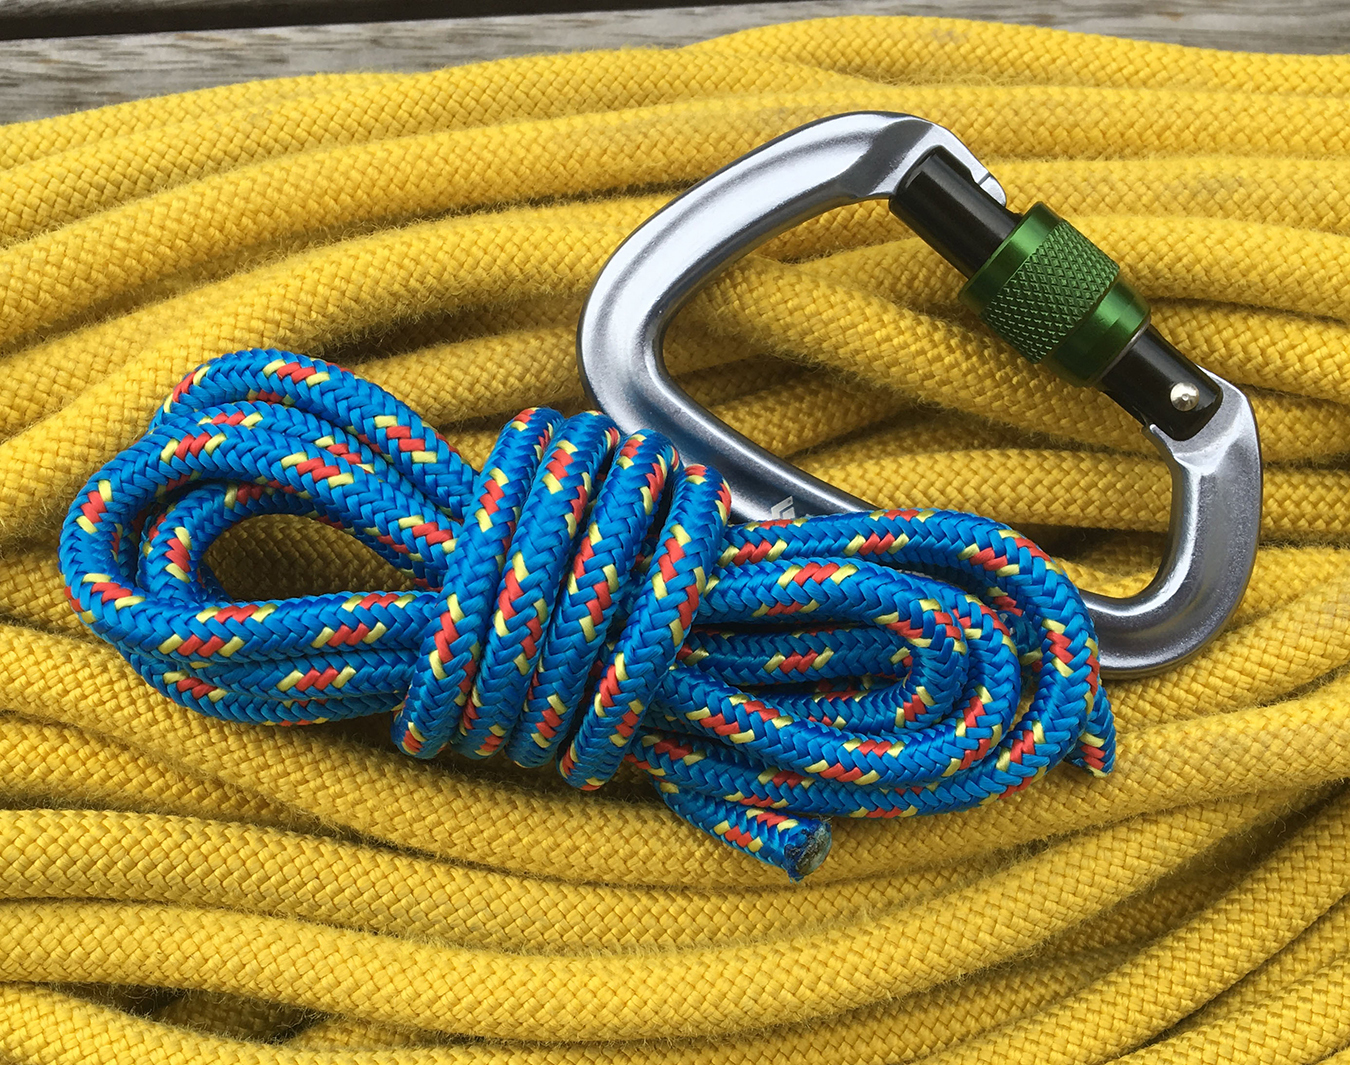 Prussick cord, rope and carabiner.